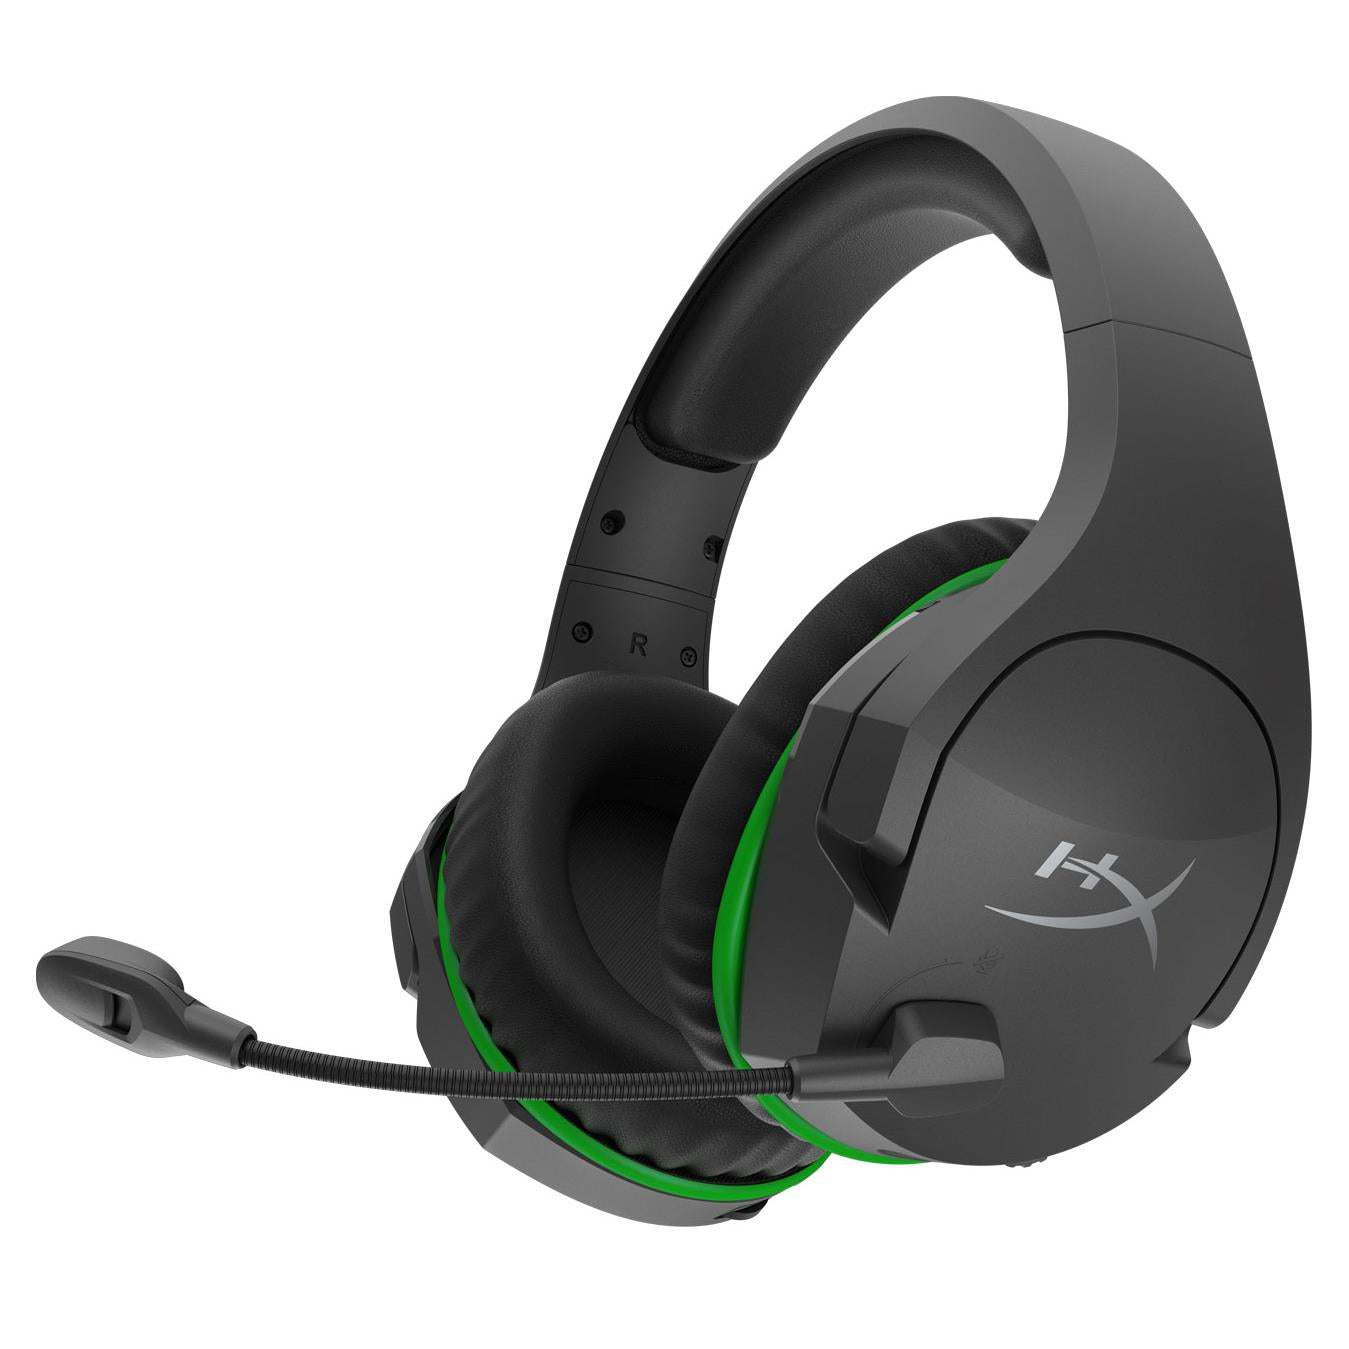 hyperx cloudx stinger core wireless gaming headset for xbox series x/s